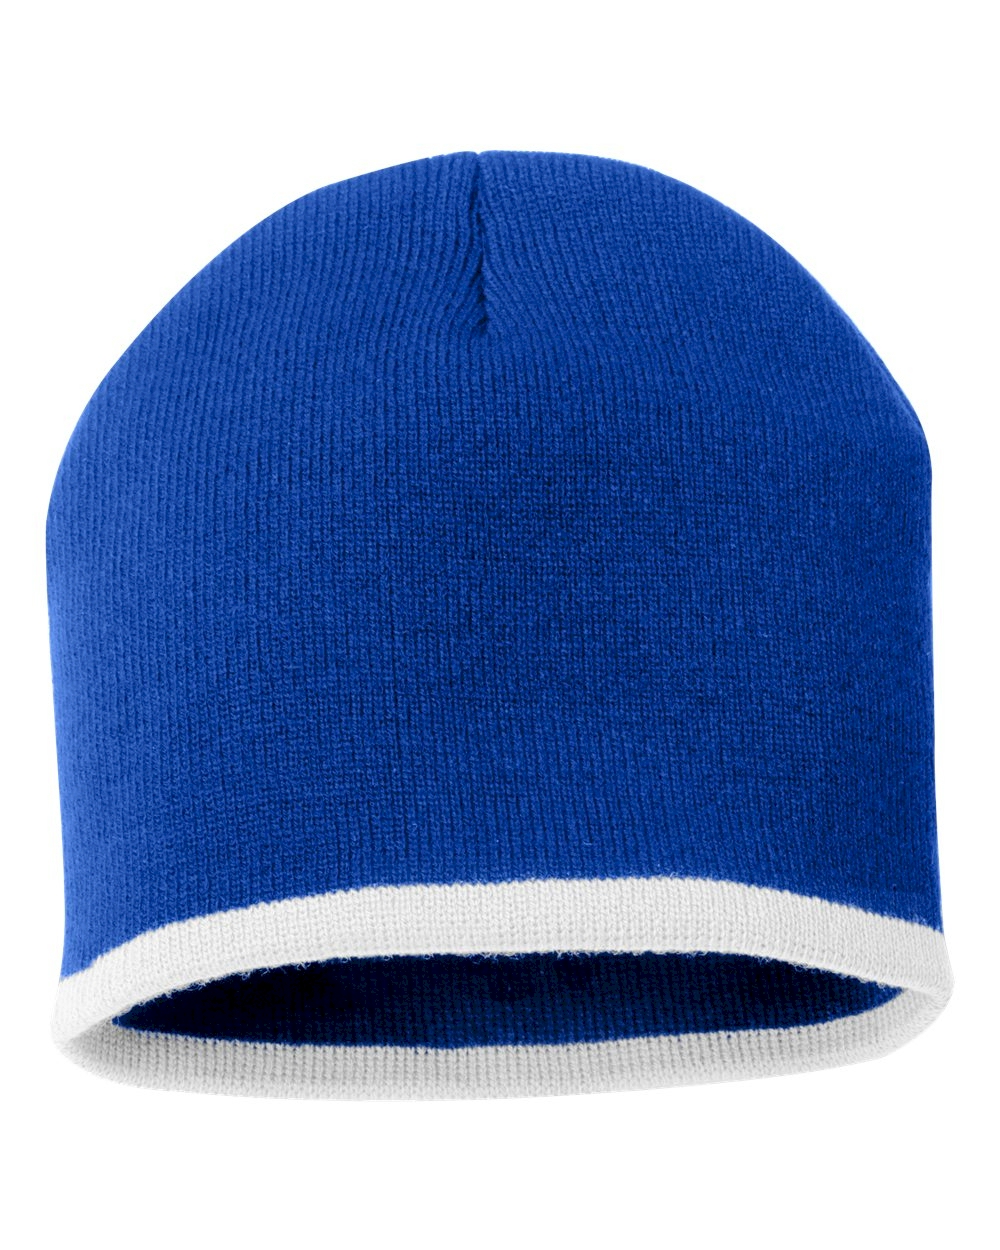 8" Knit Beanie with Striped Bottom Embroidery Blanks - ROYAL/WHITE